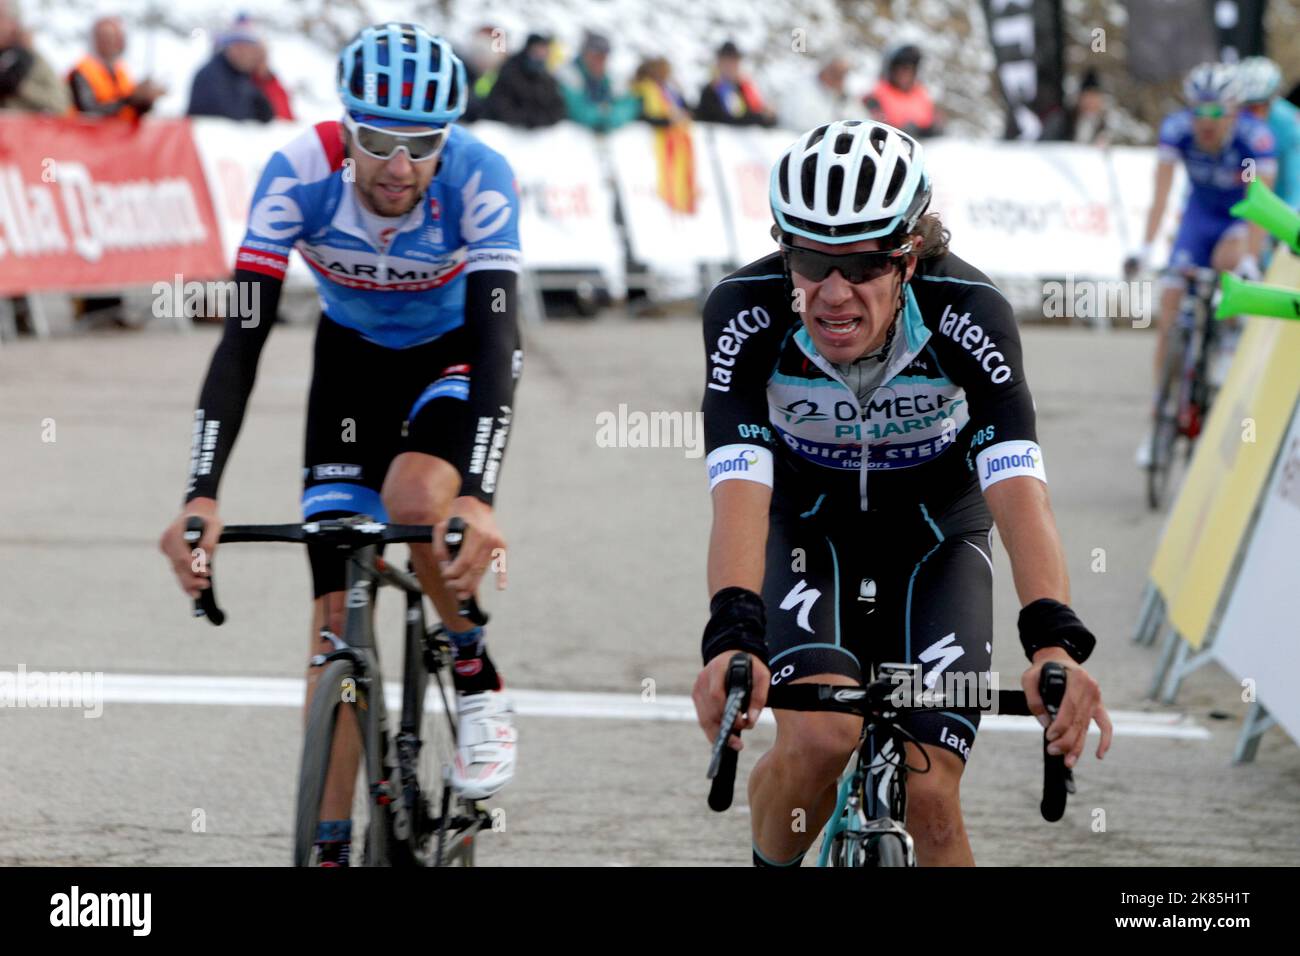 Rigoberto Uran team Omeg Pharma Quickstep arrives over the finish line in 13th place in Stage 3 of the Volta Ciclista a Catalunya 2014, 162.9km BanyolesLa Molina Stock Photo